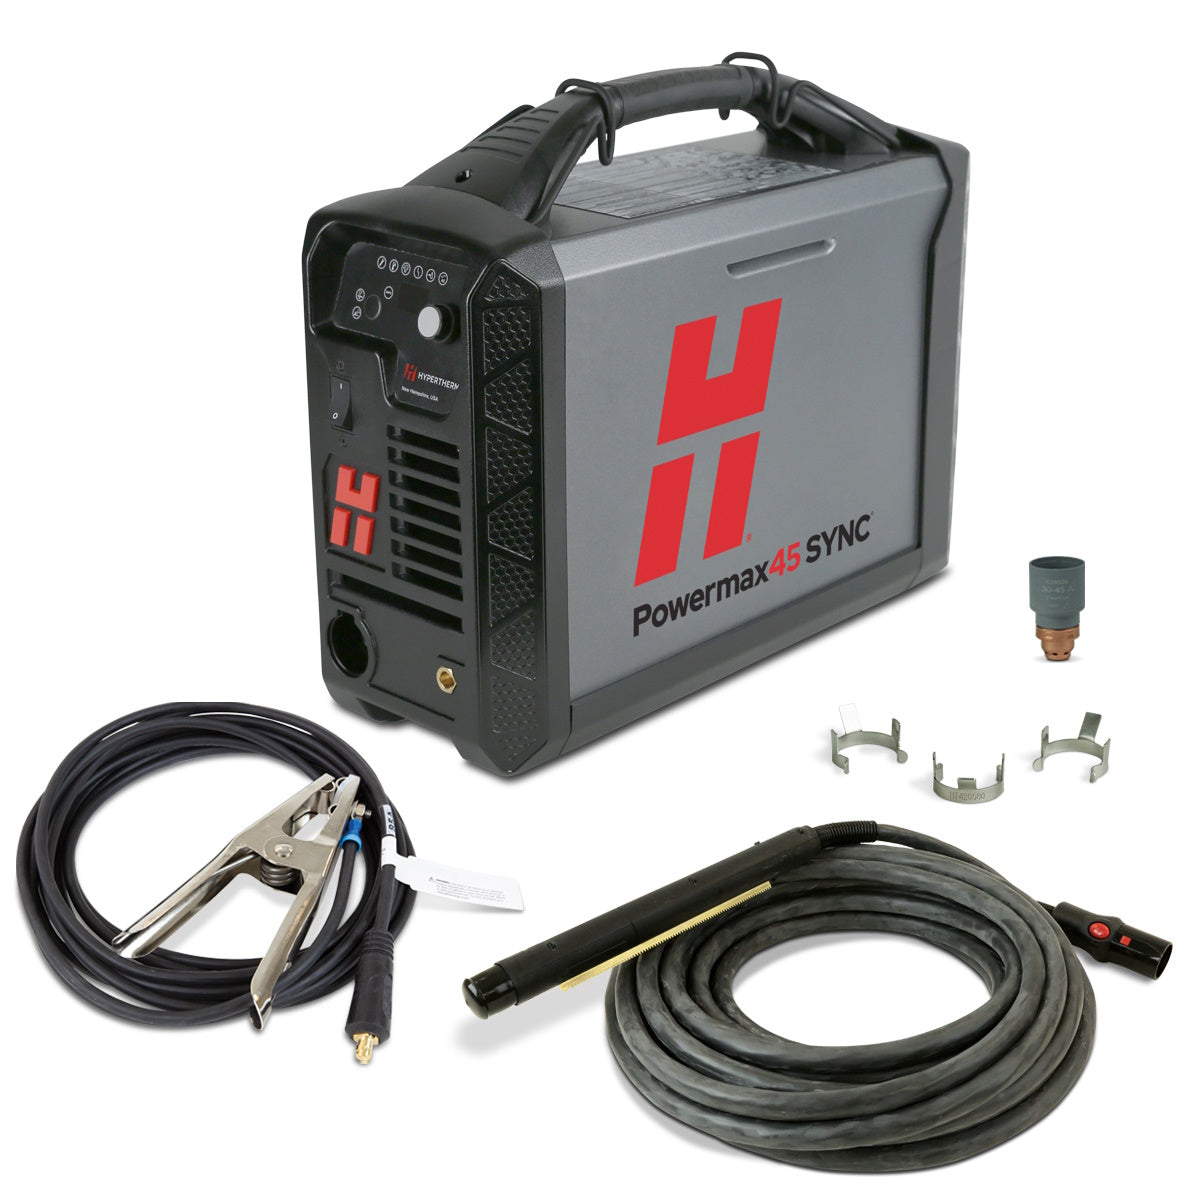 Hypertherm Powermax45 SYNC Plasma Cutter with 25ft Mechanized Torch (088580)